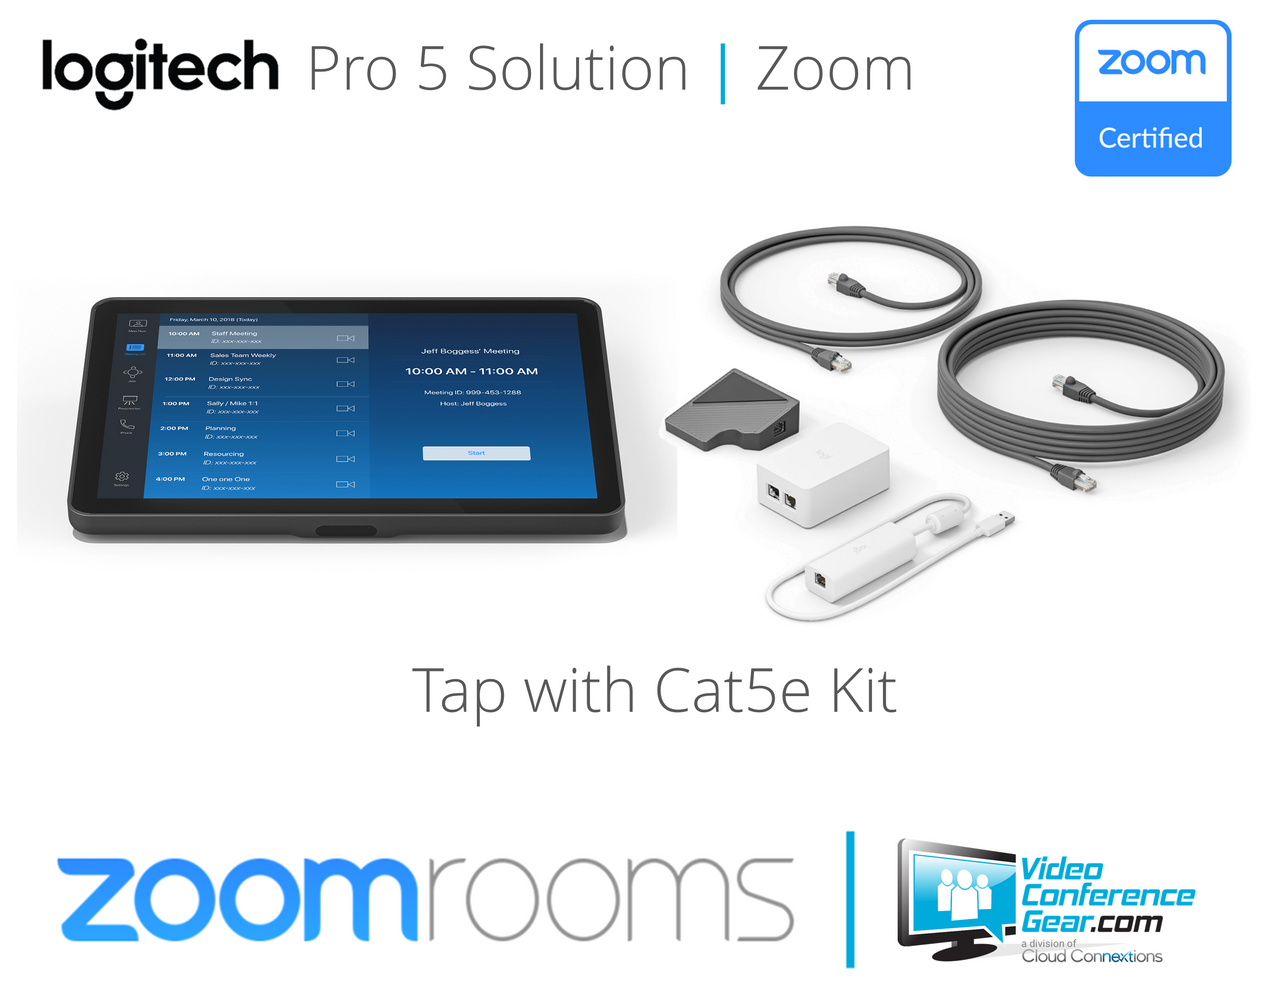 Logitech Pro 5 Zoom Rooms Solution with Rally Bar Mini, Tap Cat5e & TV Mount ideal for rooms up to 5 people